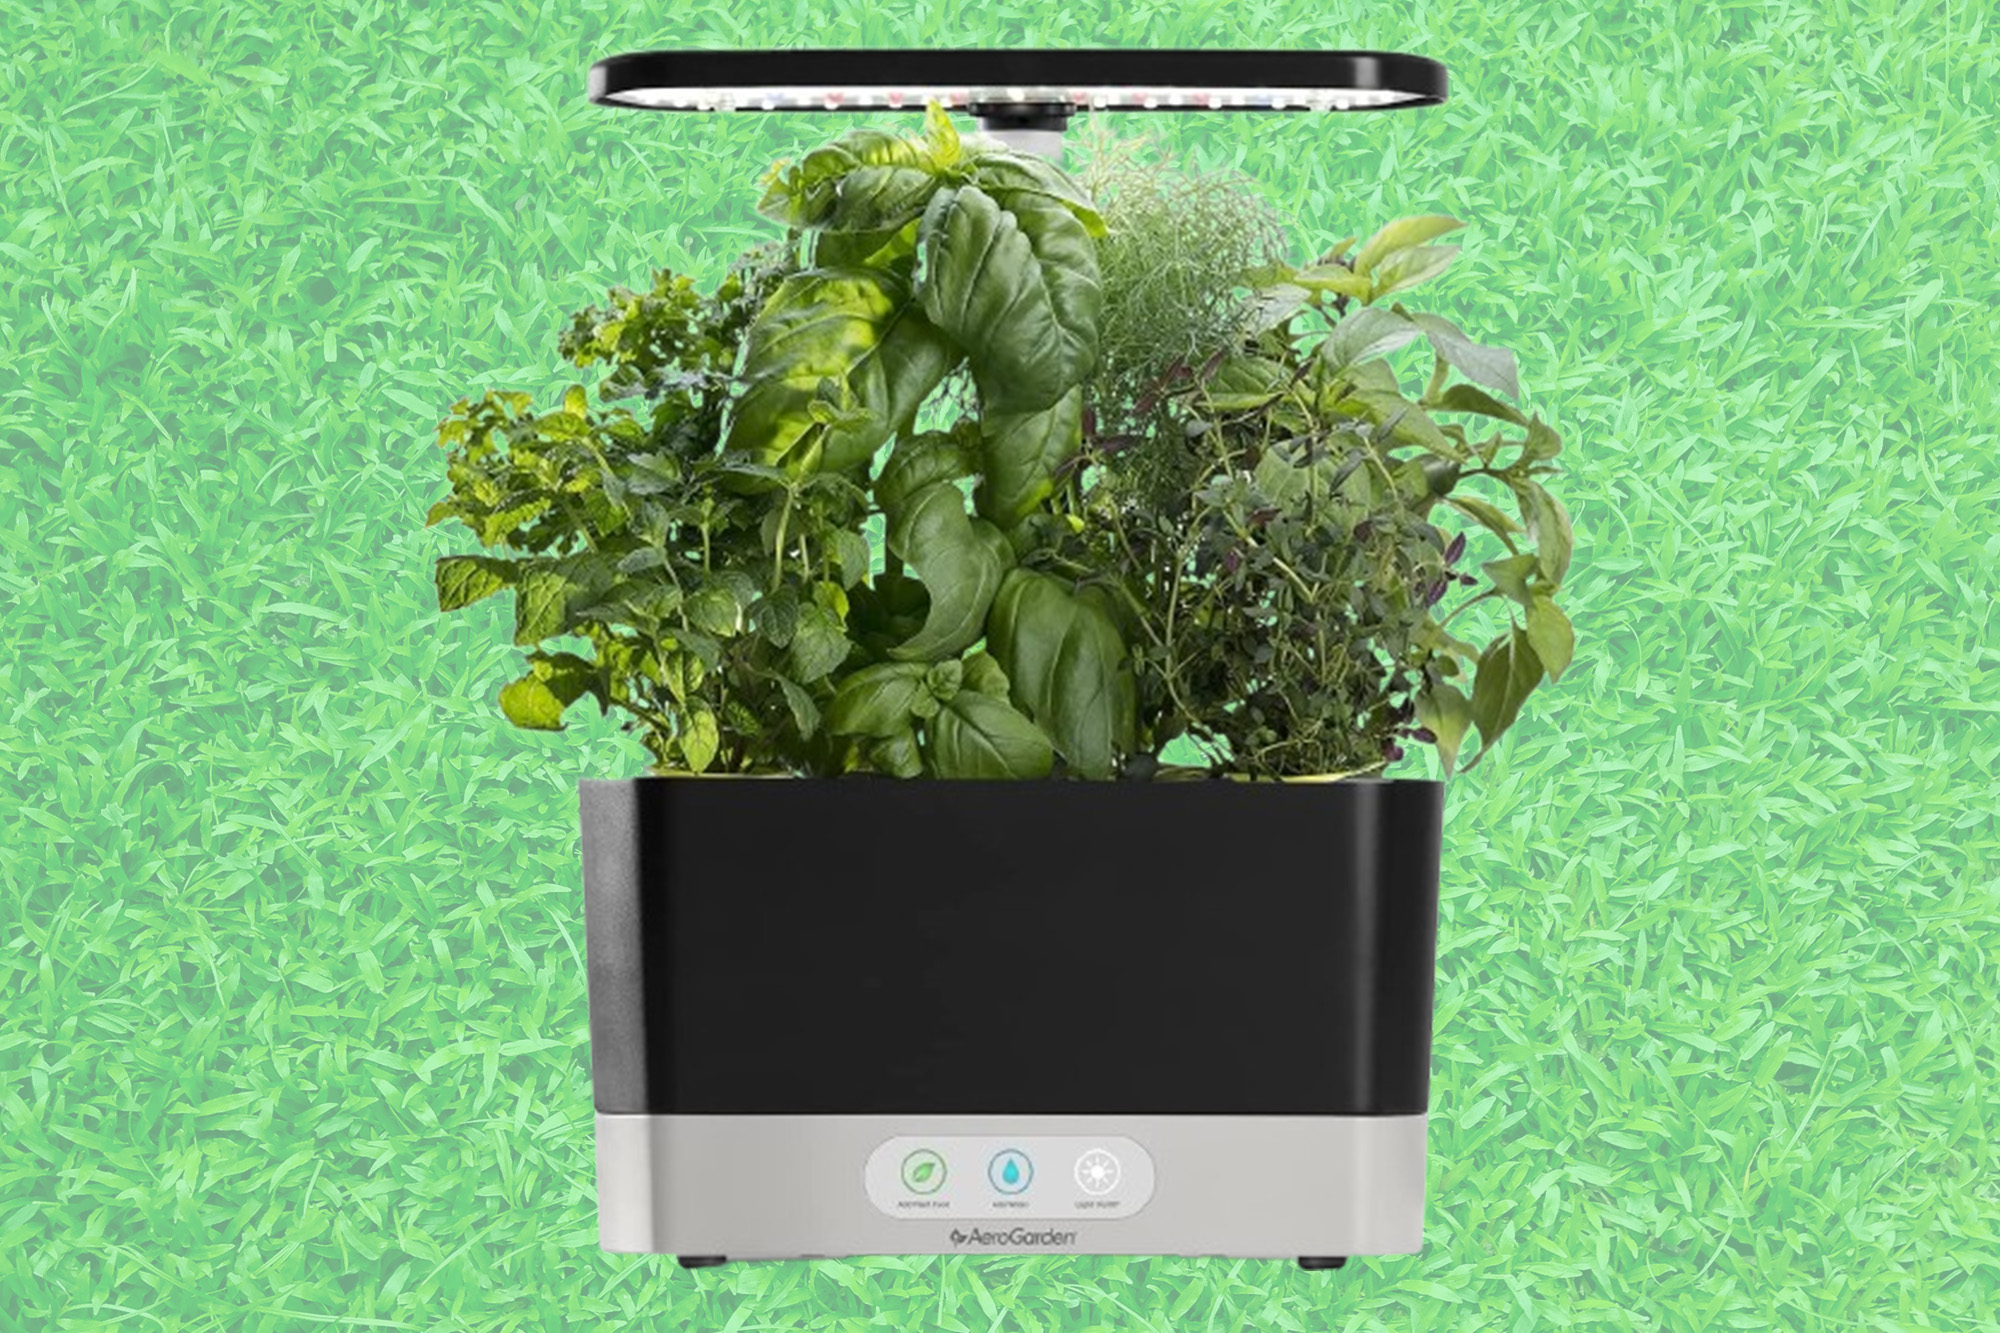 Grow greens while saving some with an AeroGarden at its lowest-ever price on Amazon